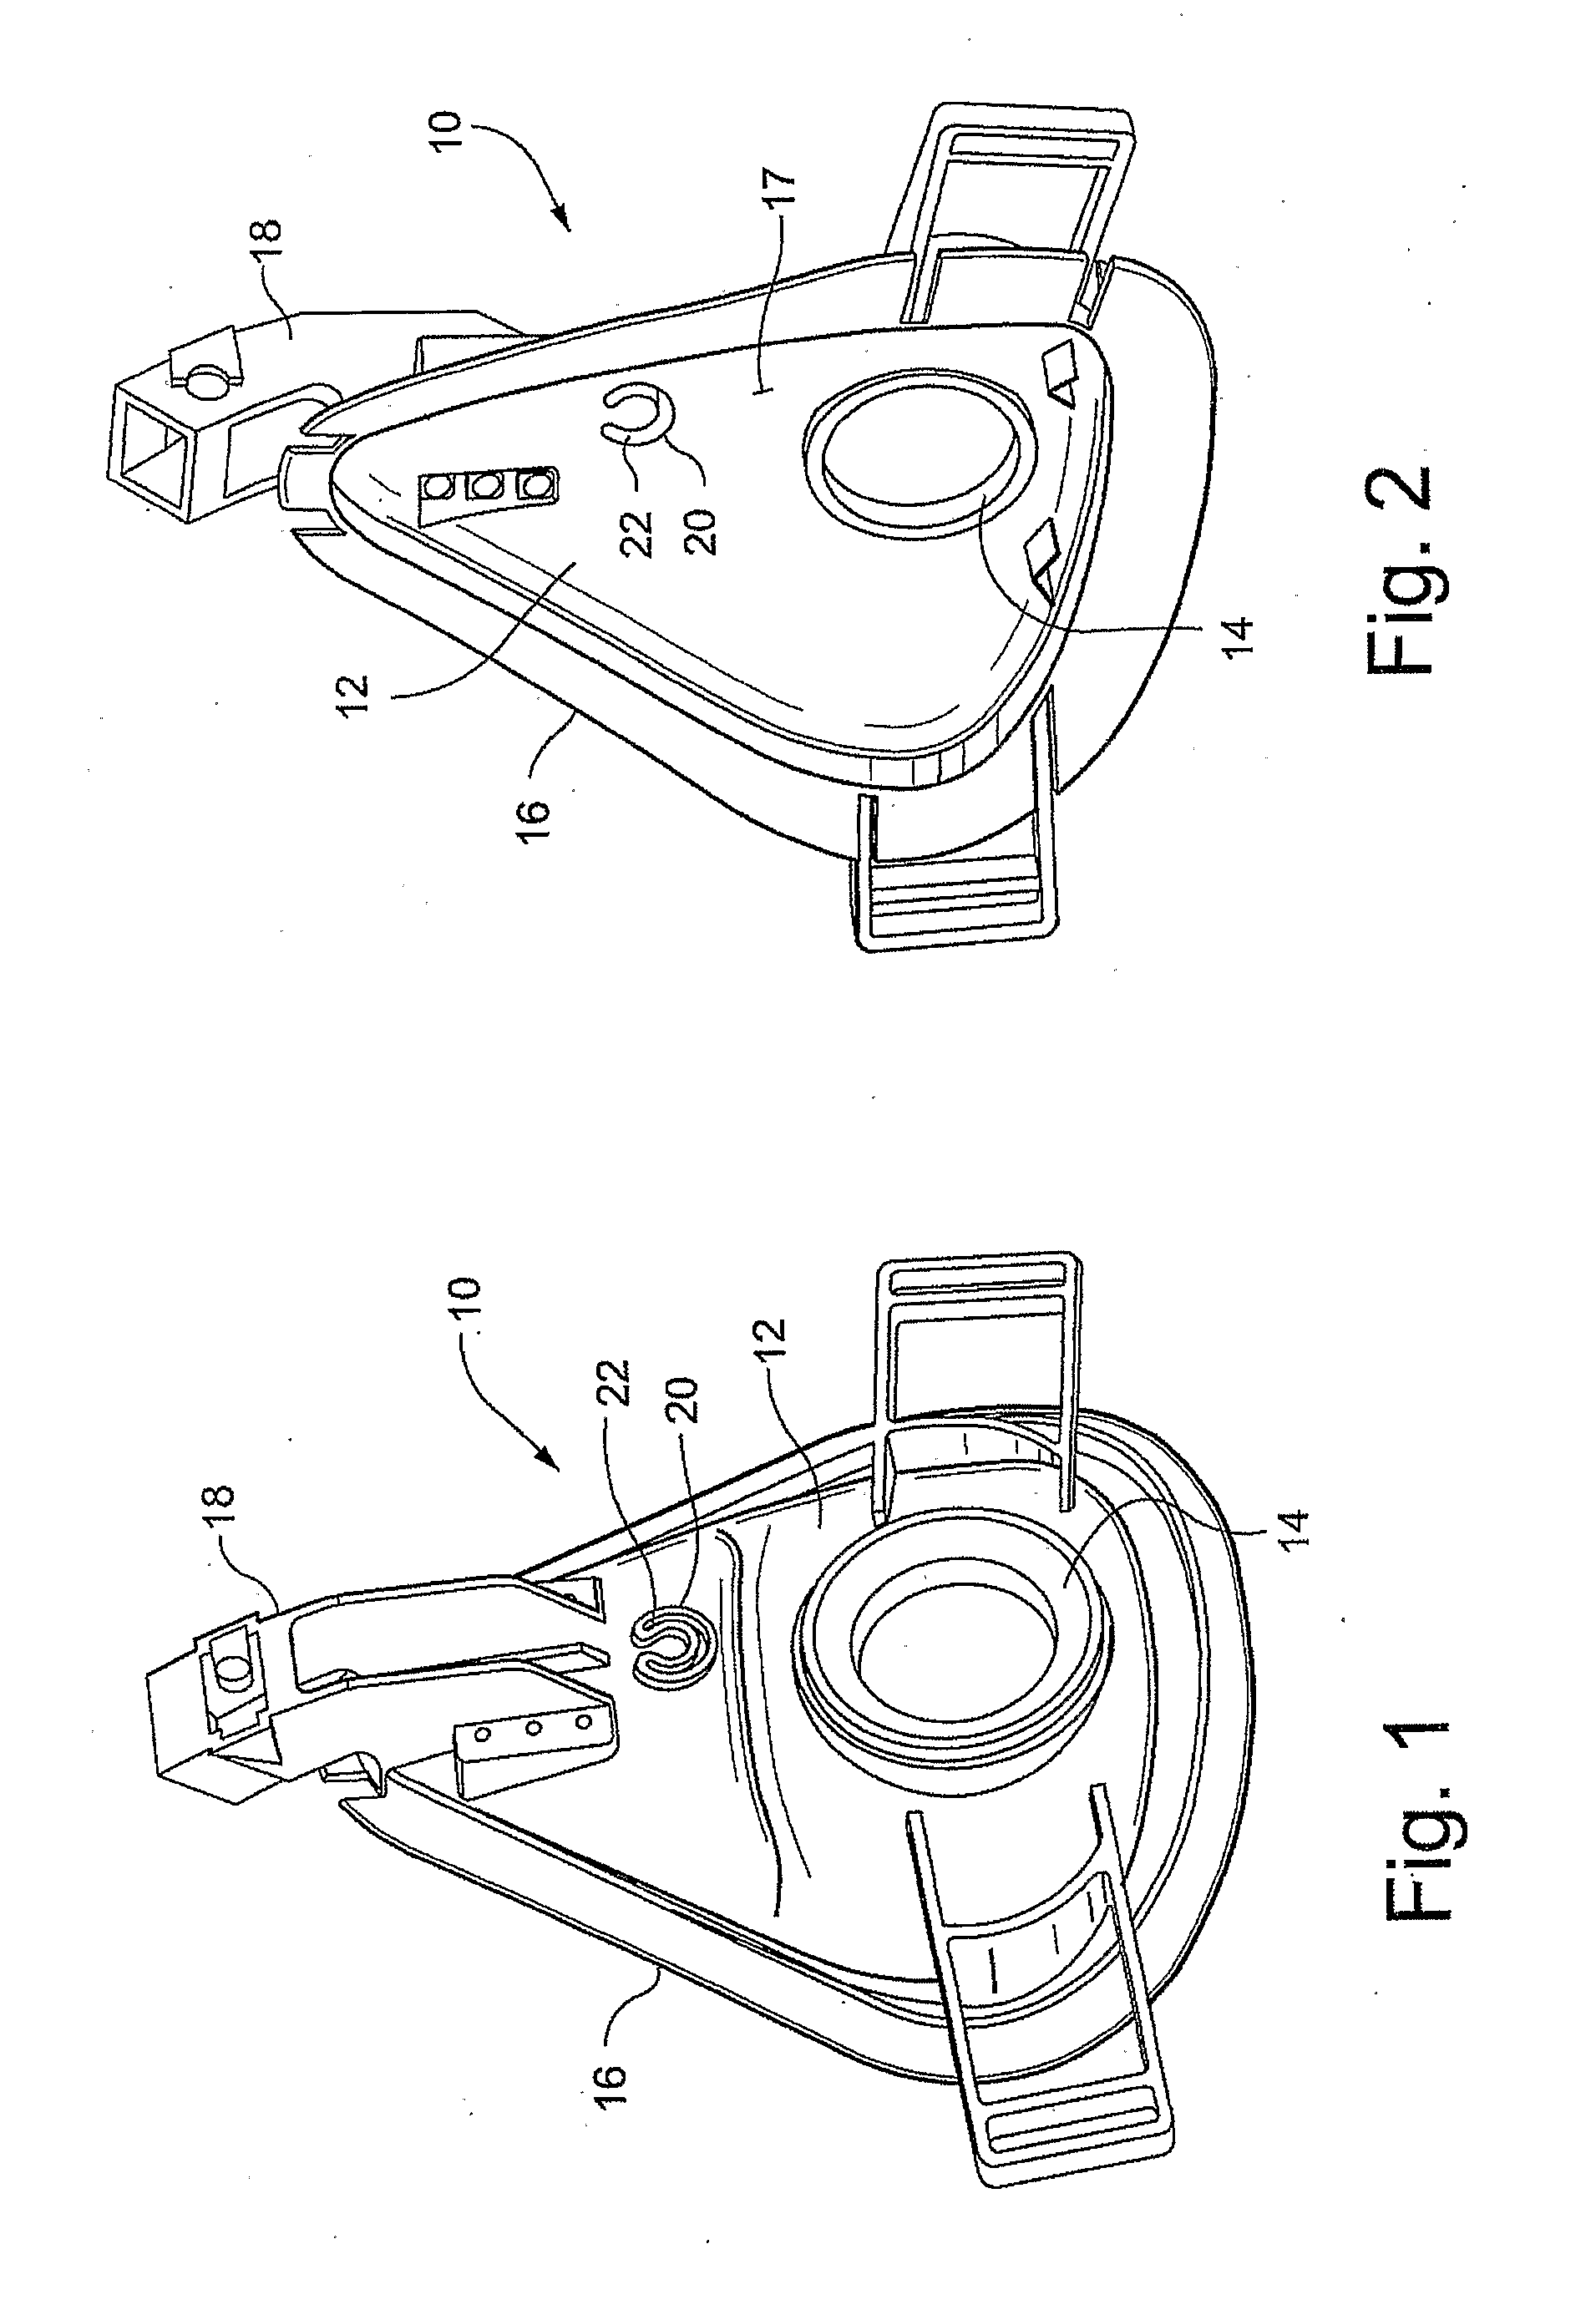 Respiratory mask having gas washout vent and method for making the mask